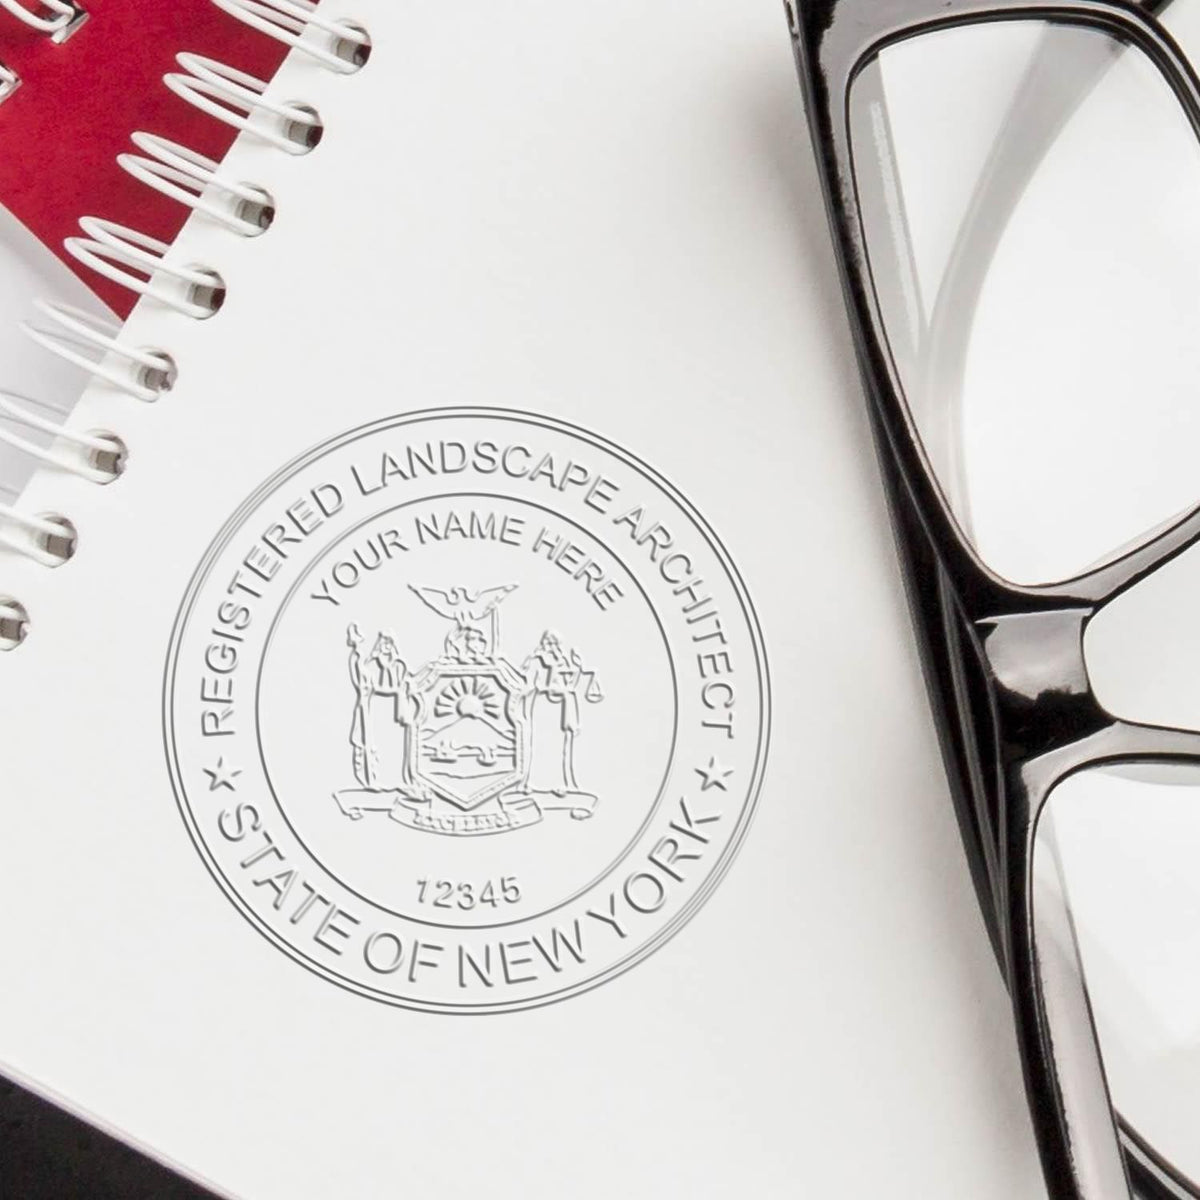 An in use photo of the Hybrid New York Landscape Architect Seal showing a sample imprint on a cardstock